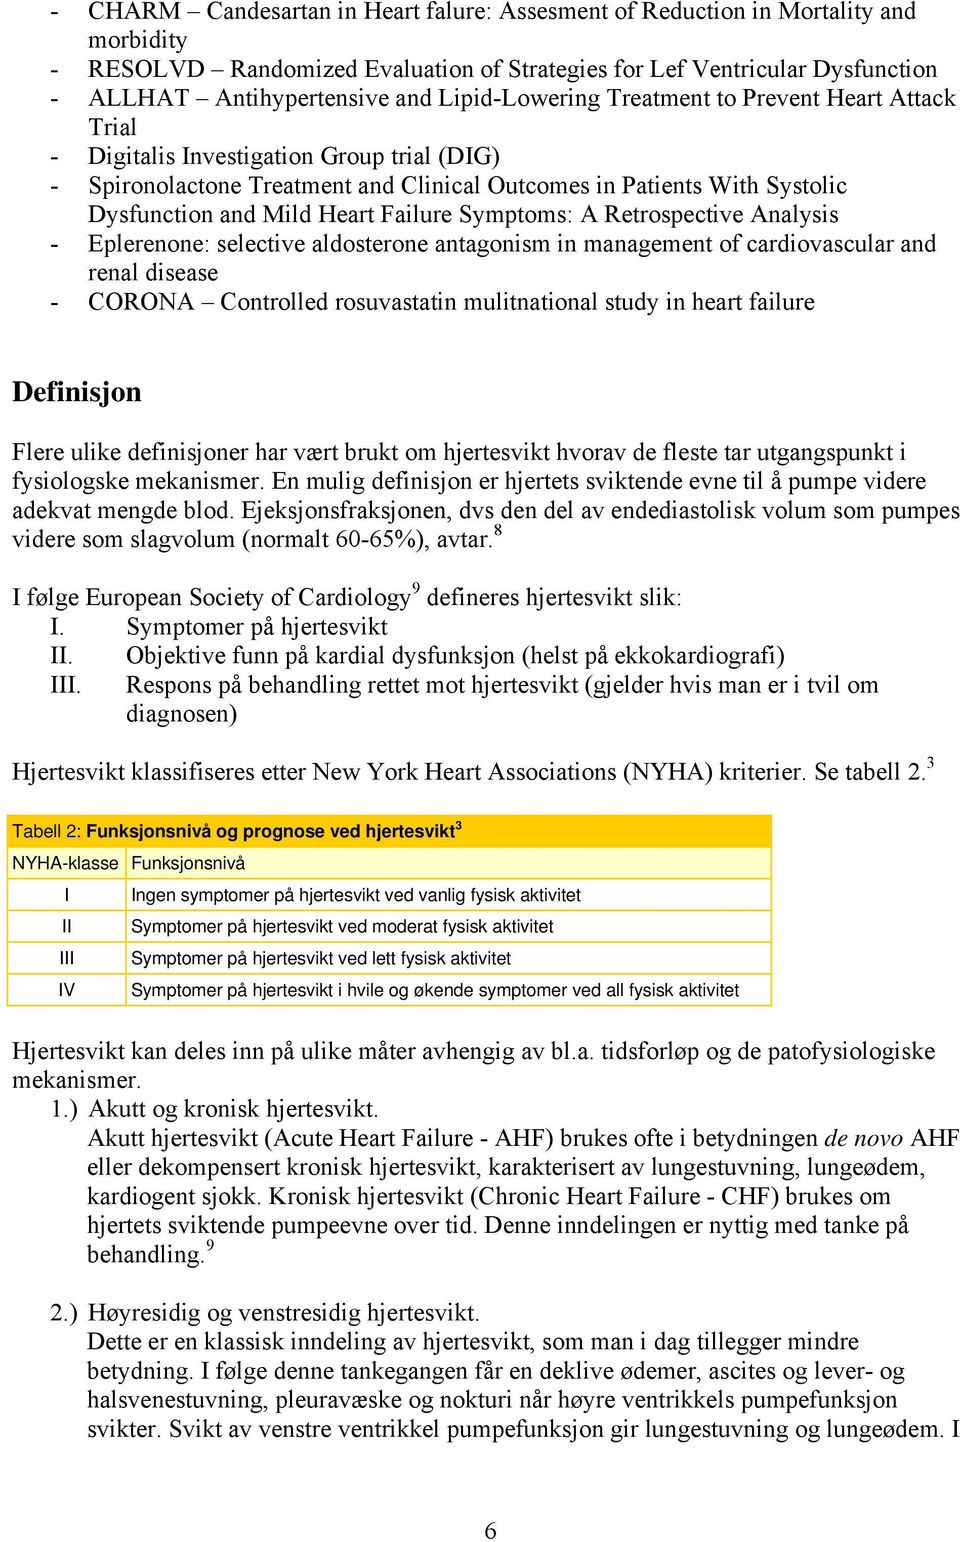 Heart Failure Symptoms: A Retrospective Analysis - Eplerenone: selective aldosterone antagonism in management of cardiovascular and renal disease - CORONA Controlled rosuvastatin mulitnational study